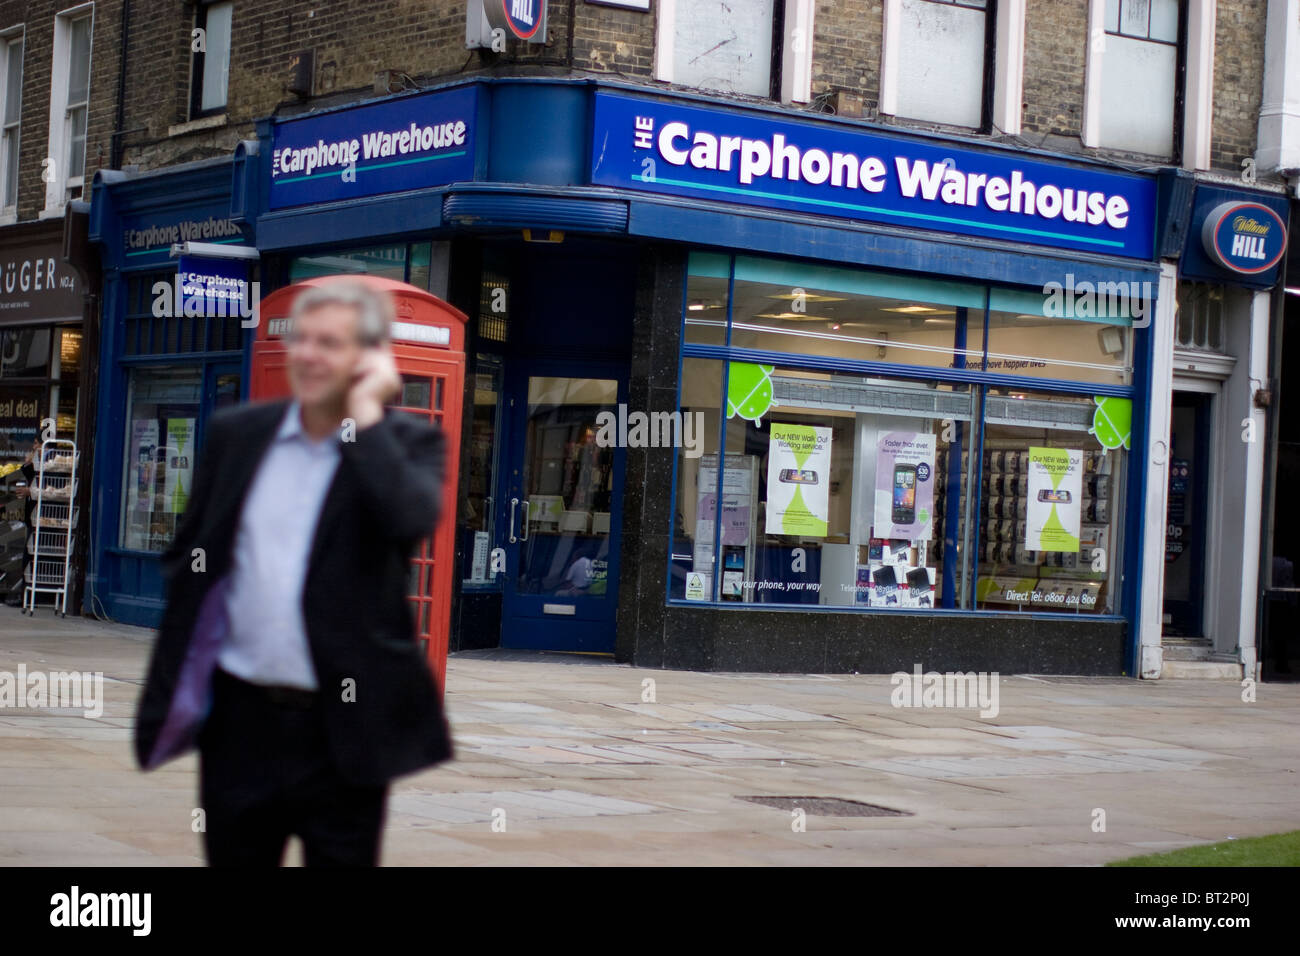 The carphone warehouse mobile phone retail outlet shop, with member of public on phone in front of red phone box Stock Photo